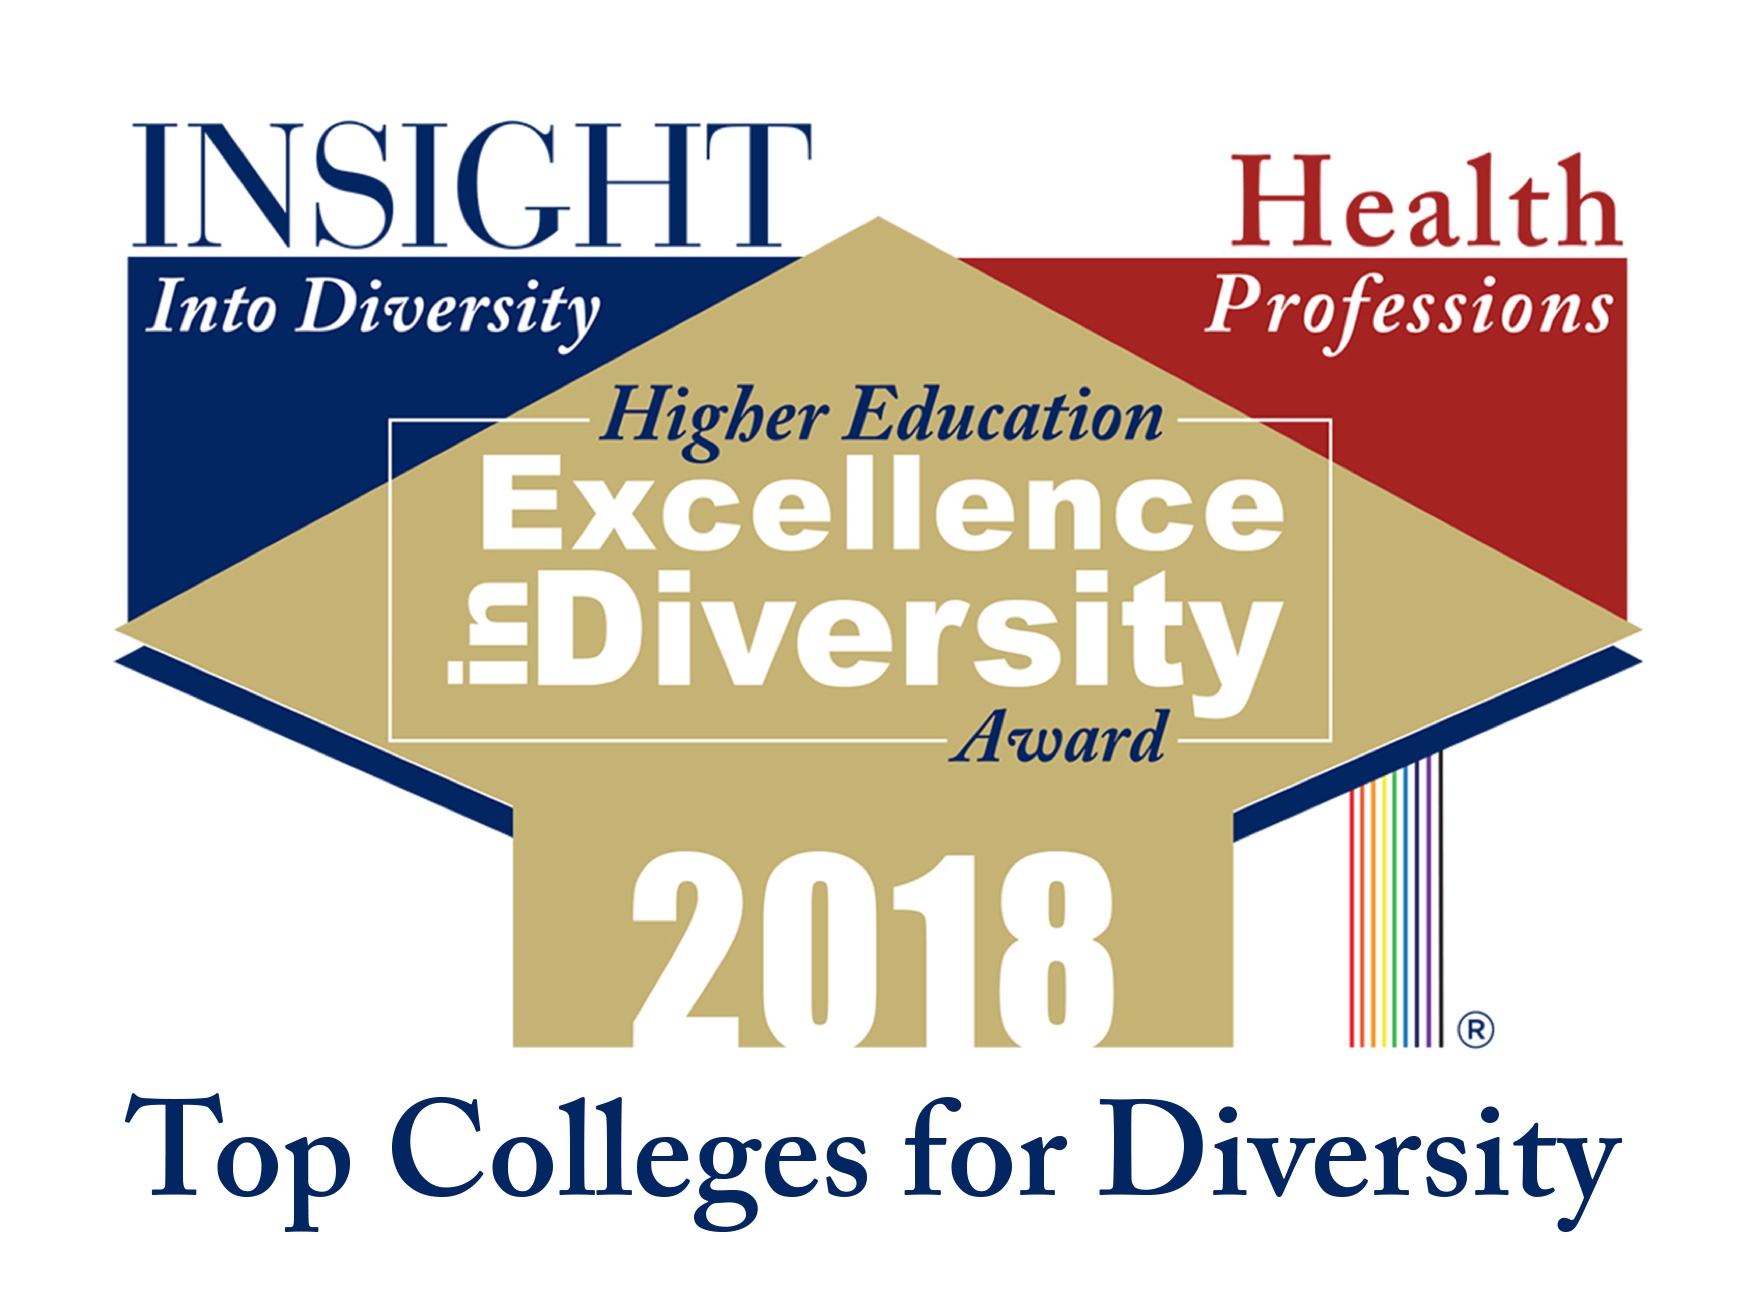 INSIGHT Into Diversity Health Professions Higher Education Excellence -Diversity Award 2018